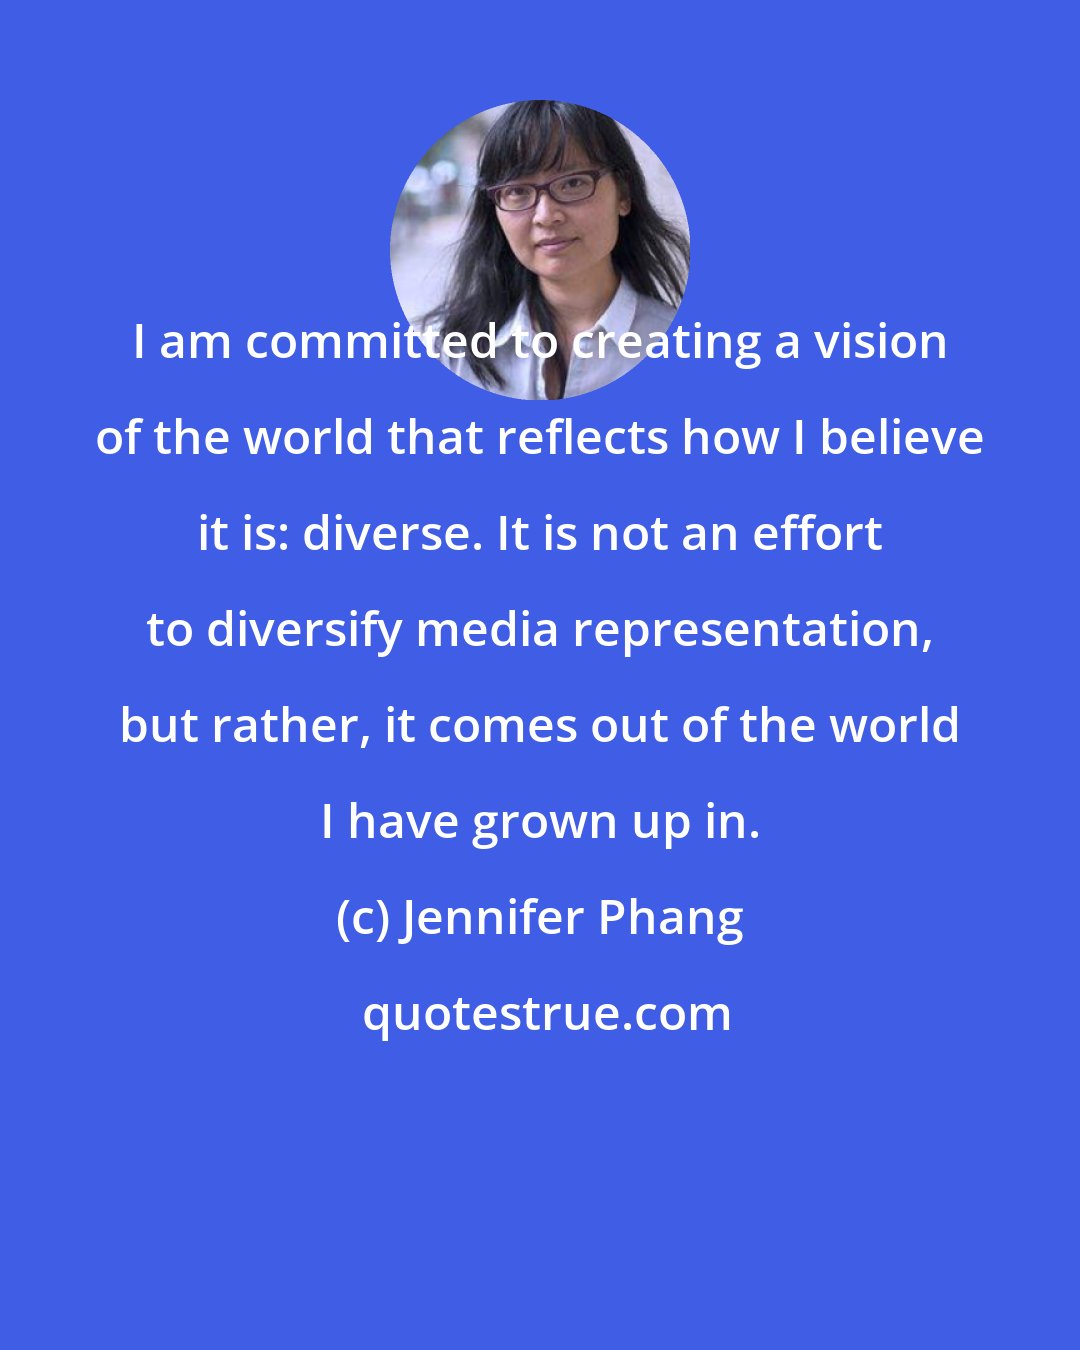 Jennifer Phang: I am committed to creating a vision of the world that reflects how I believe it is: diverse. It is not an effort to diversify media representation, but rather, it comes out of the world I have grown up in.